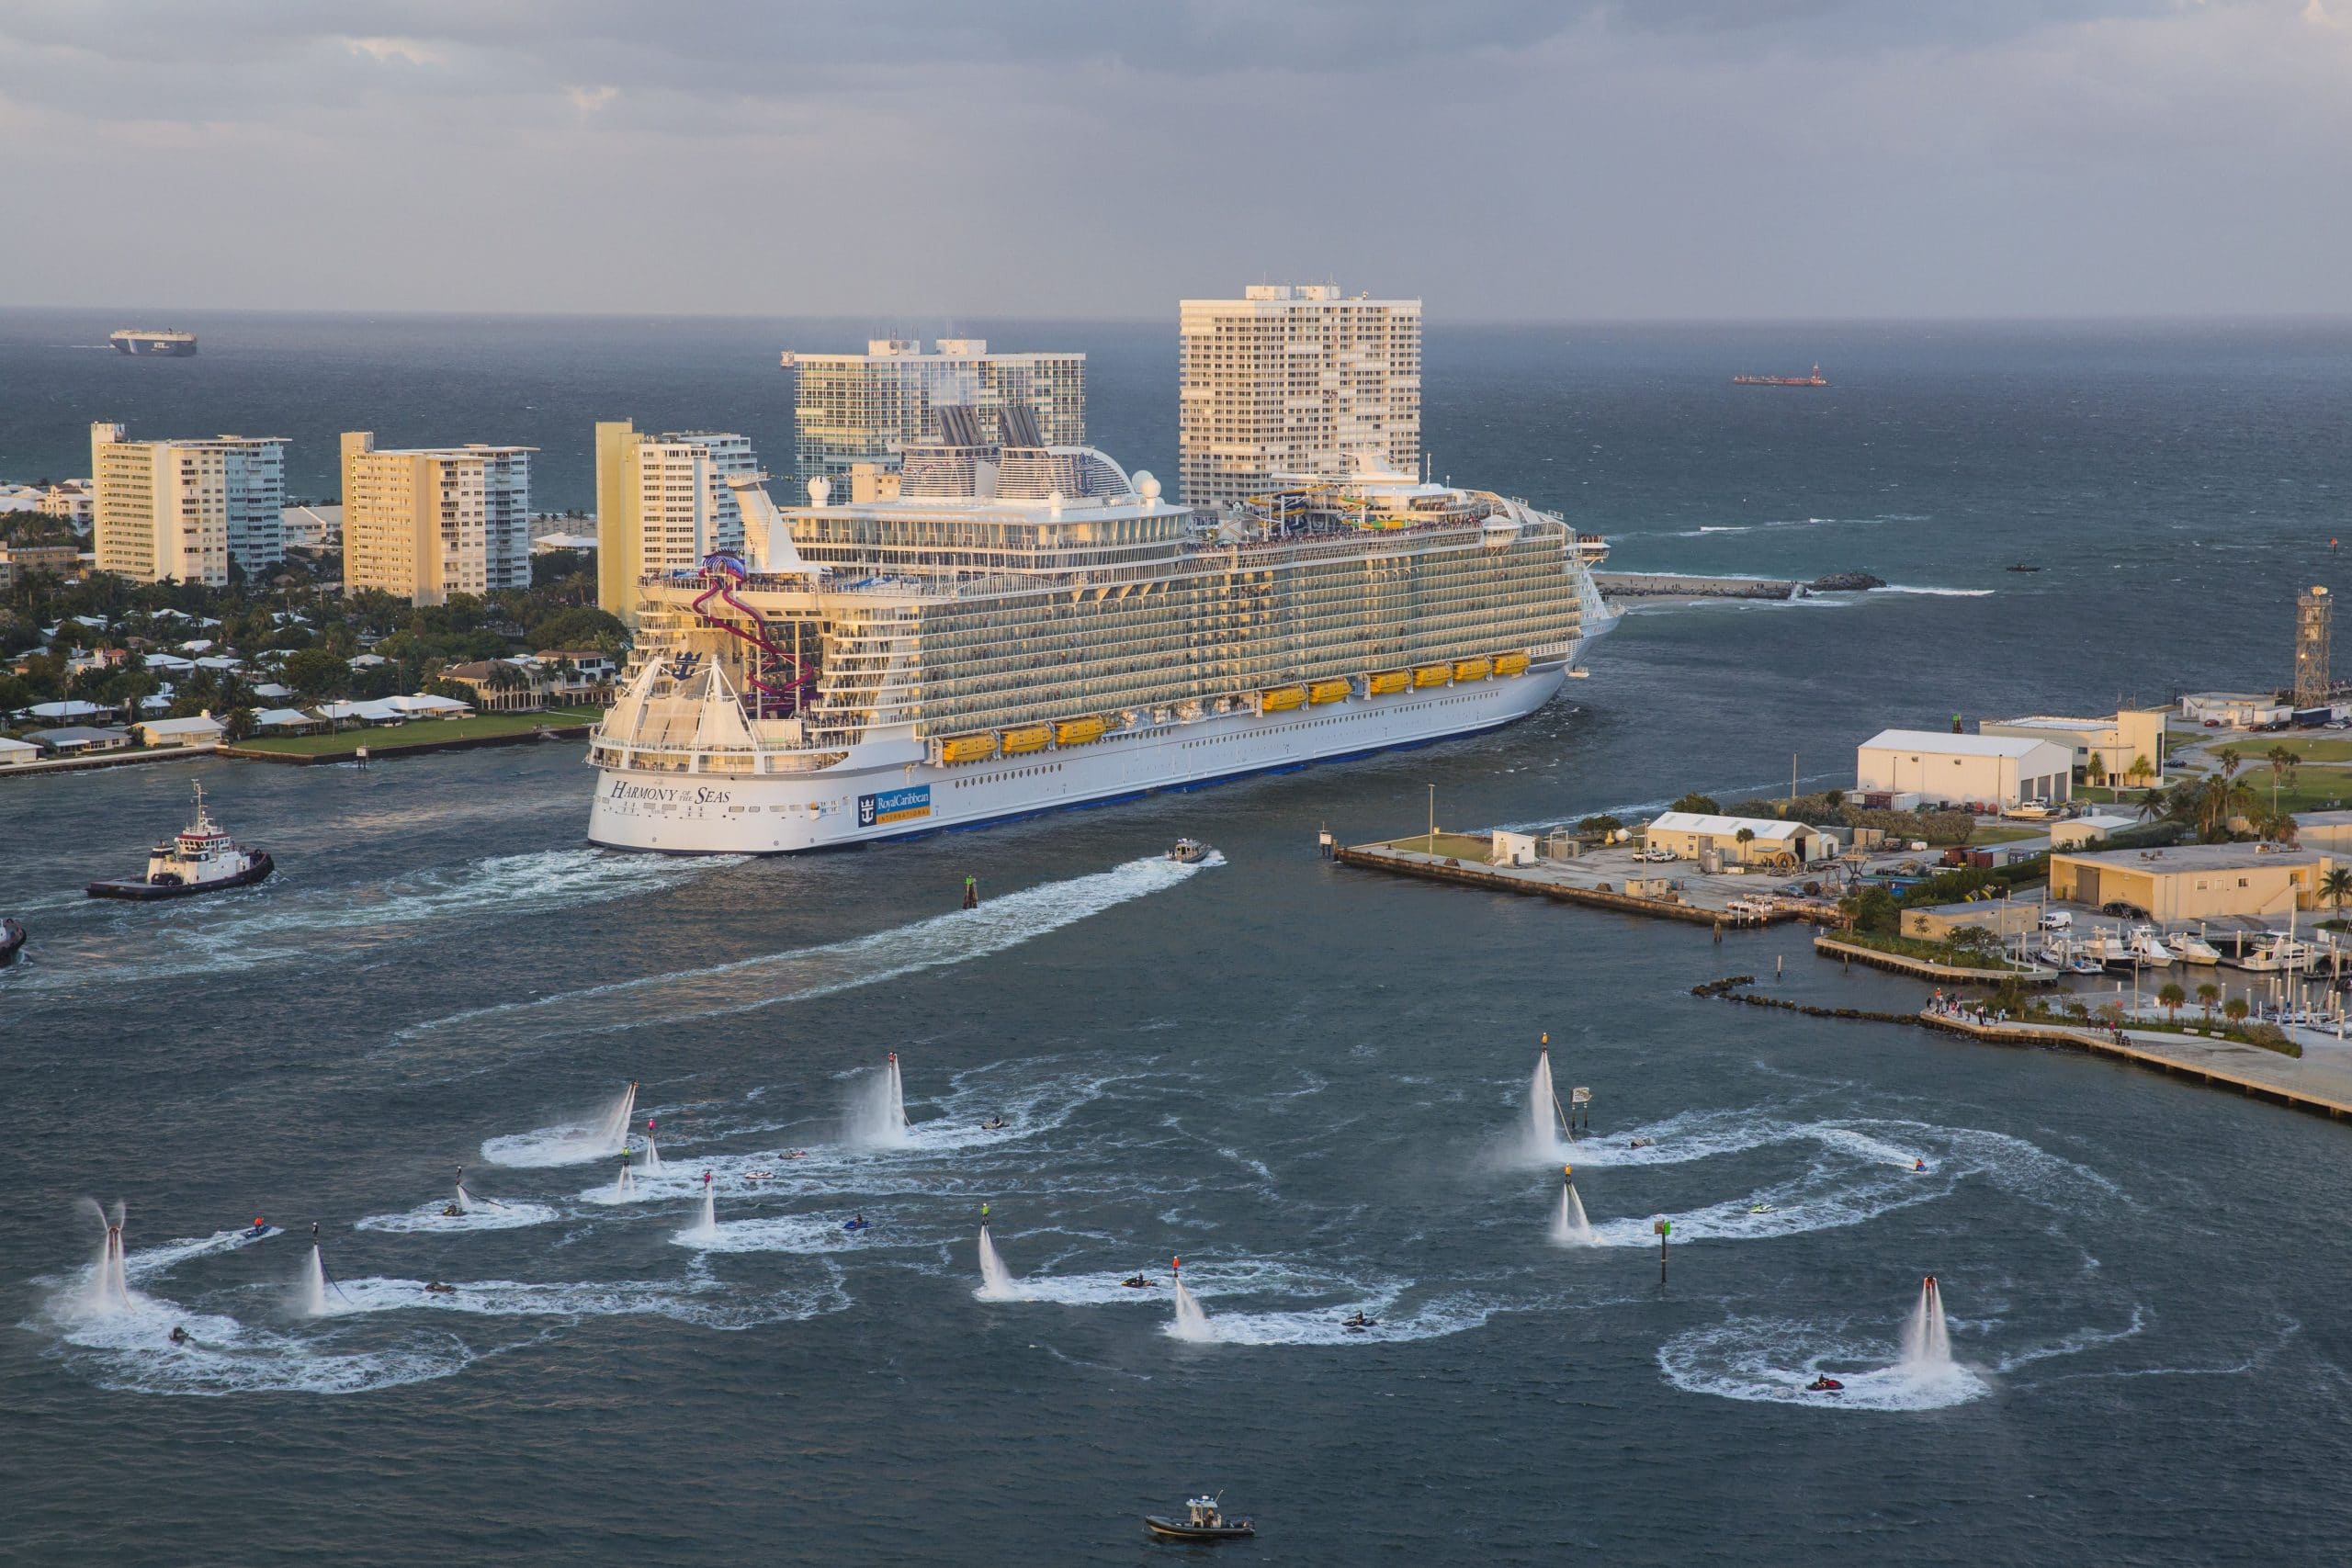 HM, aerials, Three Sisters event, Harmony of the Seas sails on maiden voyage out of Port Everglades, Fort Lauderdale, Nov 5, 2016, rear view, starboard side, port buildings, ocean view in background, flotilla send-off, team of 16 jetboard and jetpack riders from Aquafly Hydroflight Sports Performance Team,